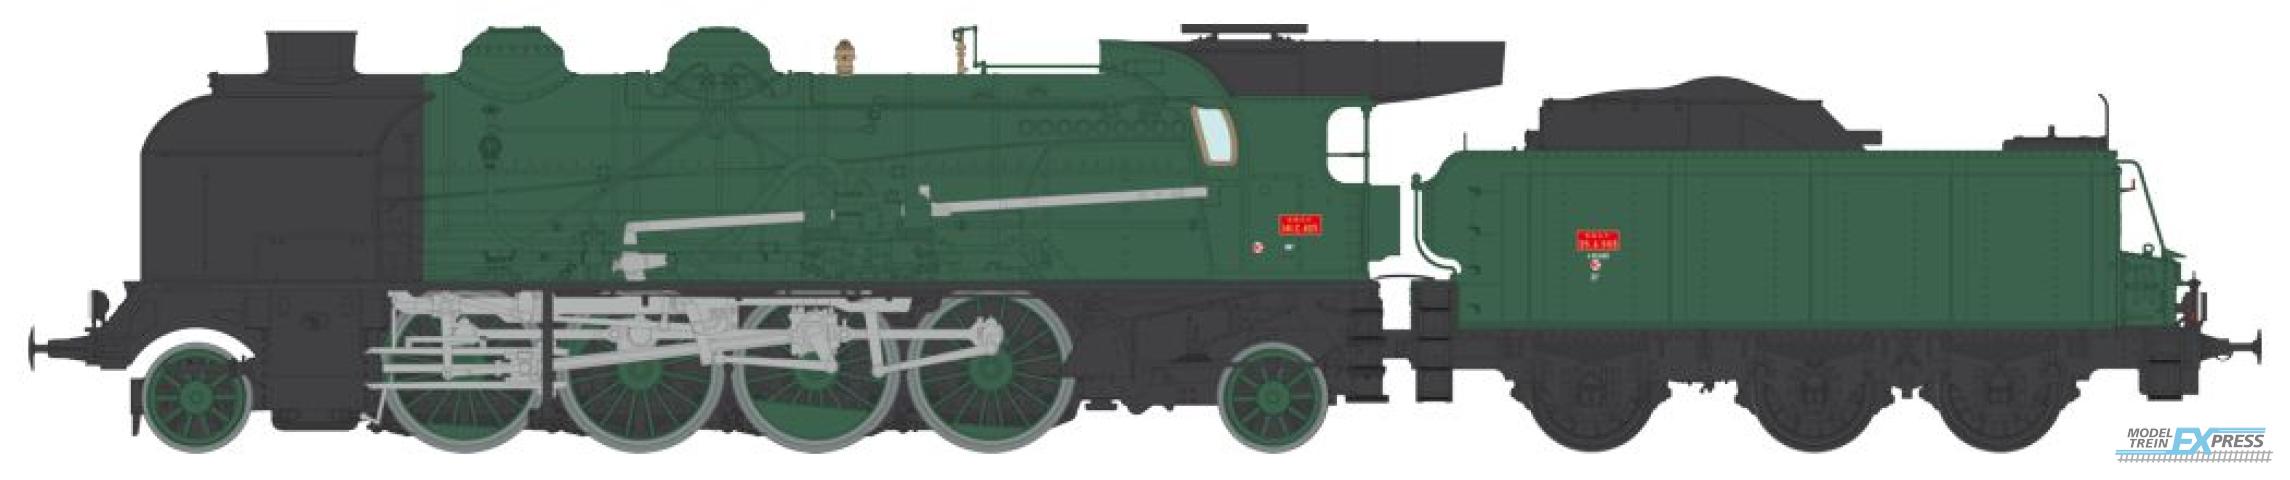 REE models MB-127S 4-141 E 425 SNCF MONTLUÇON depot, 25 m? 25 A 593 tender, provided with two additional sets of road number plates (1 CAPDENAC depot and 1 without depot name) - DCC Sound & Smoke